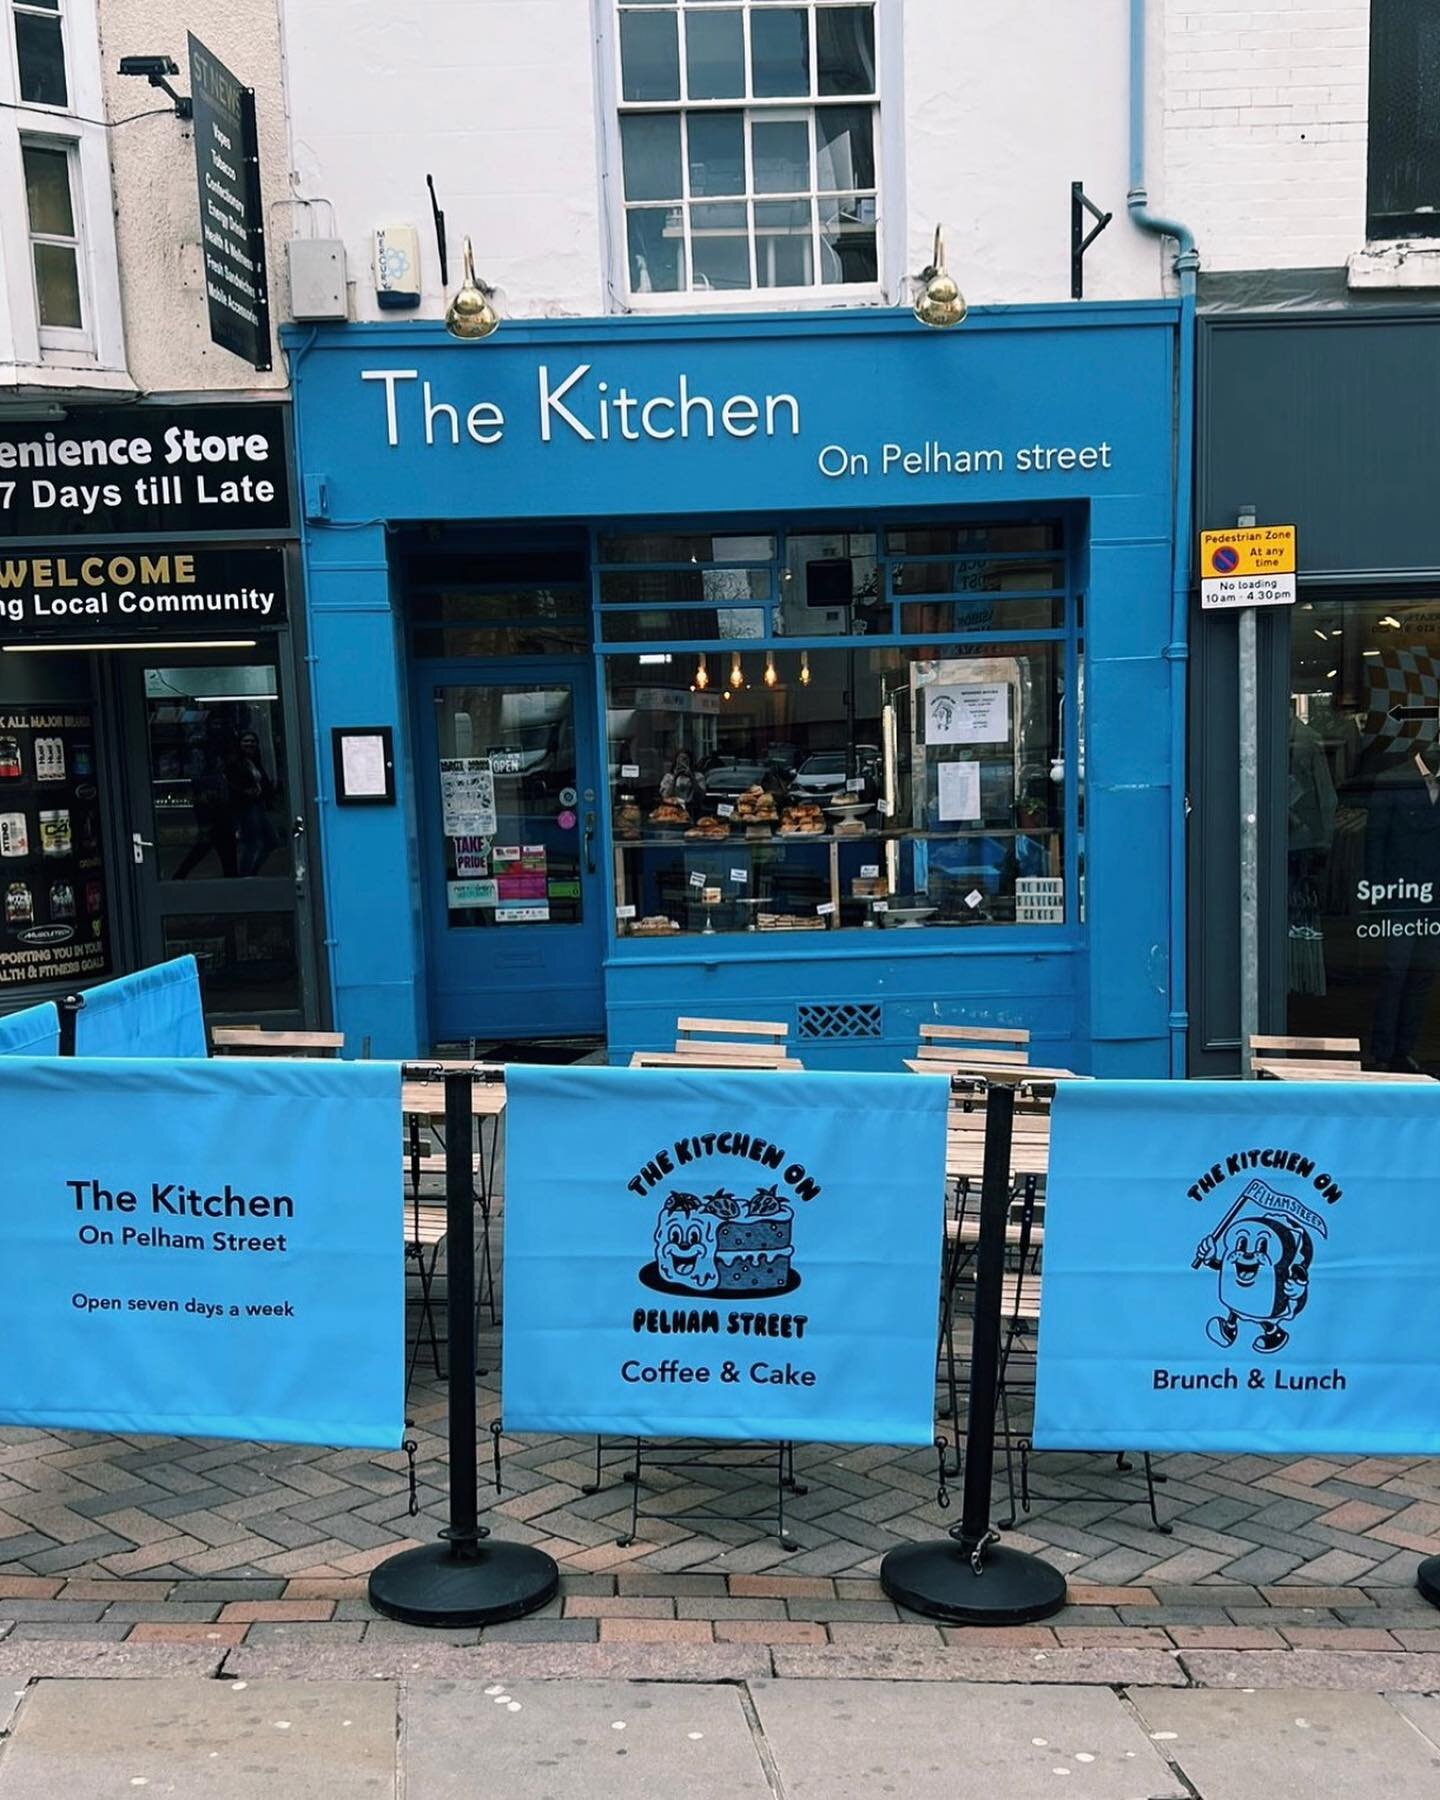 new banner day! we thought it was time to give the front a little refresh so new banners it is, with our mascots by @foxblood 🥪 🍰 

.
.
.
.
.
.
.
.
.
.
.
.
#nottingham #notts #lovenotts #indienotts #visitnottingham #cafe #hockley #cafes #breakfast 